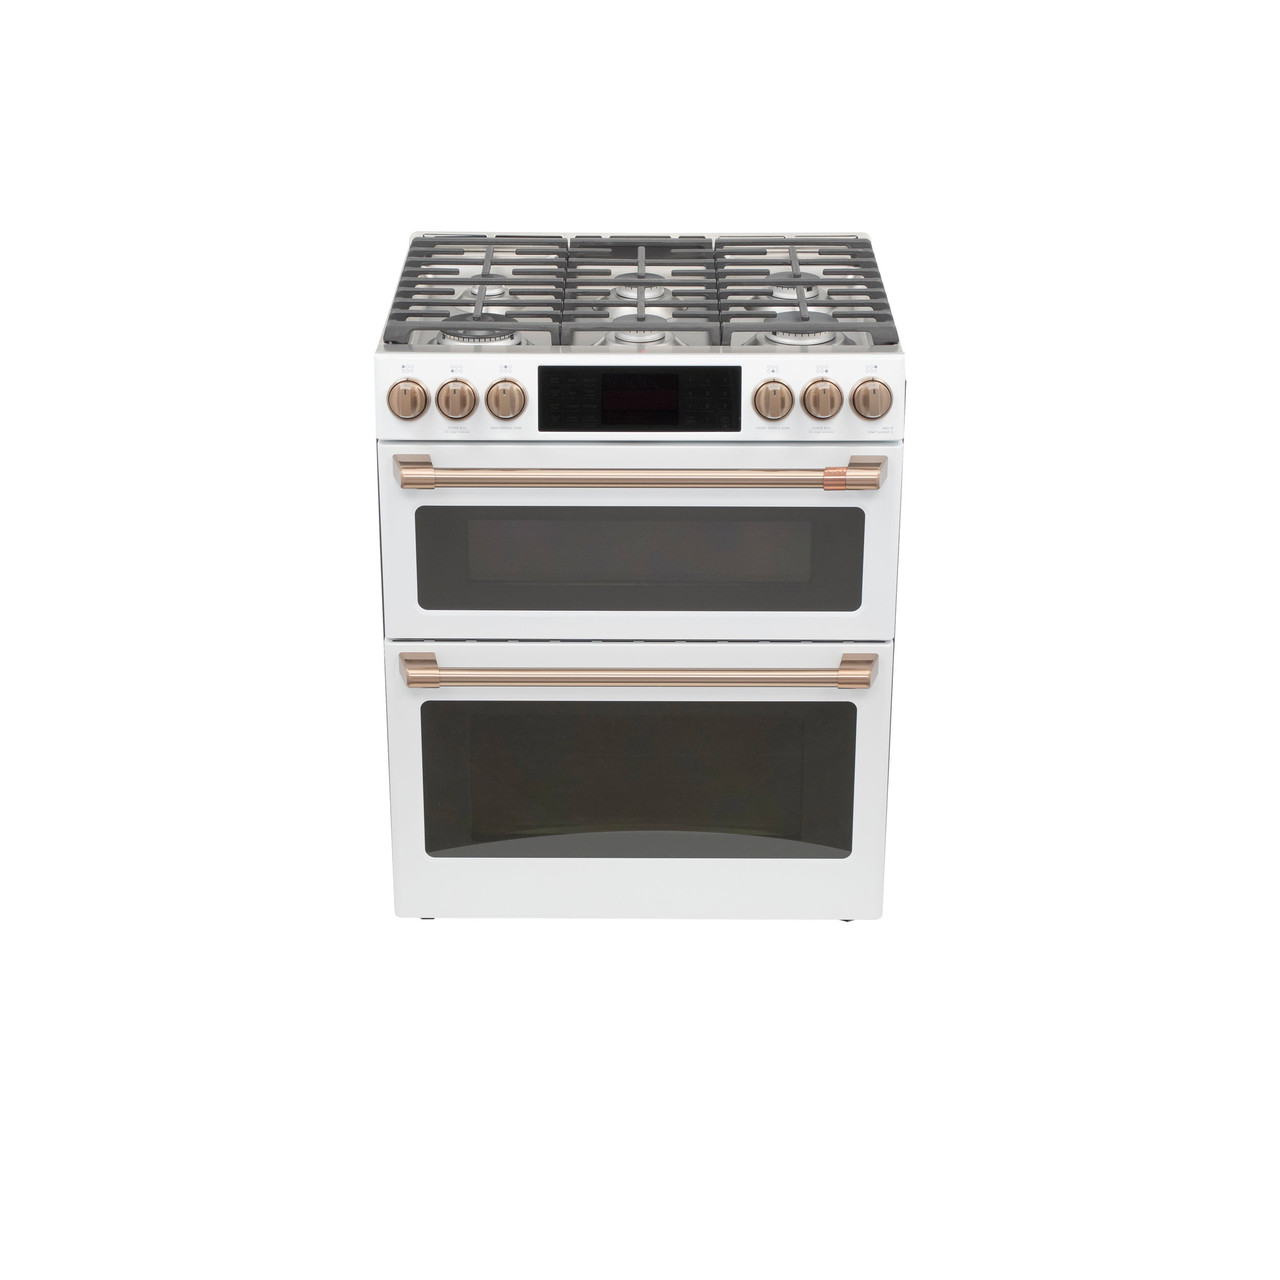 GE Profile 30inch Slide-In Gas Range with 5 Sealed Burners, Grill, Griddle,  5.6 Cu. Ft. Single Oven & Storage Drawer - Stainless Steel